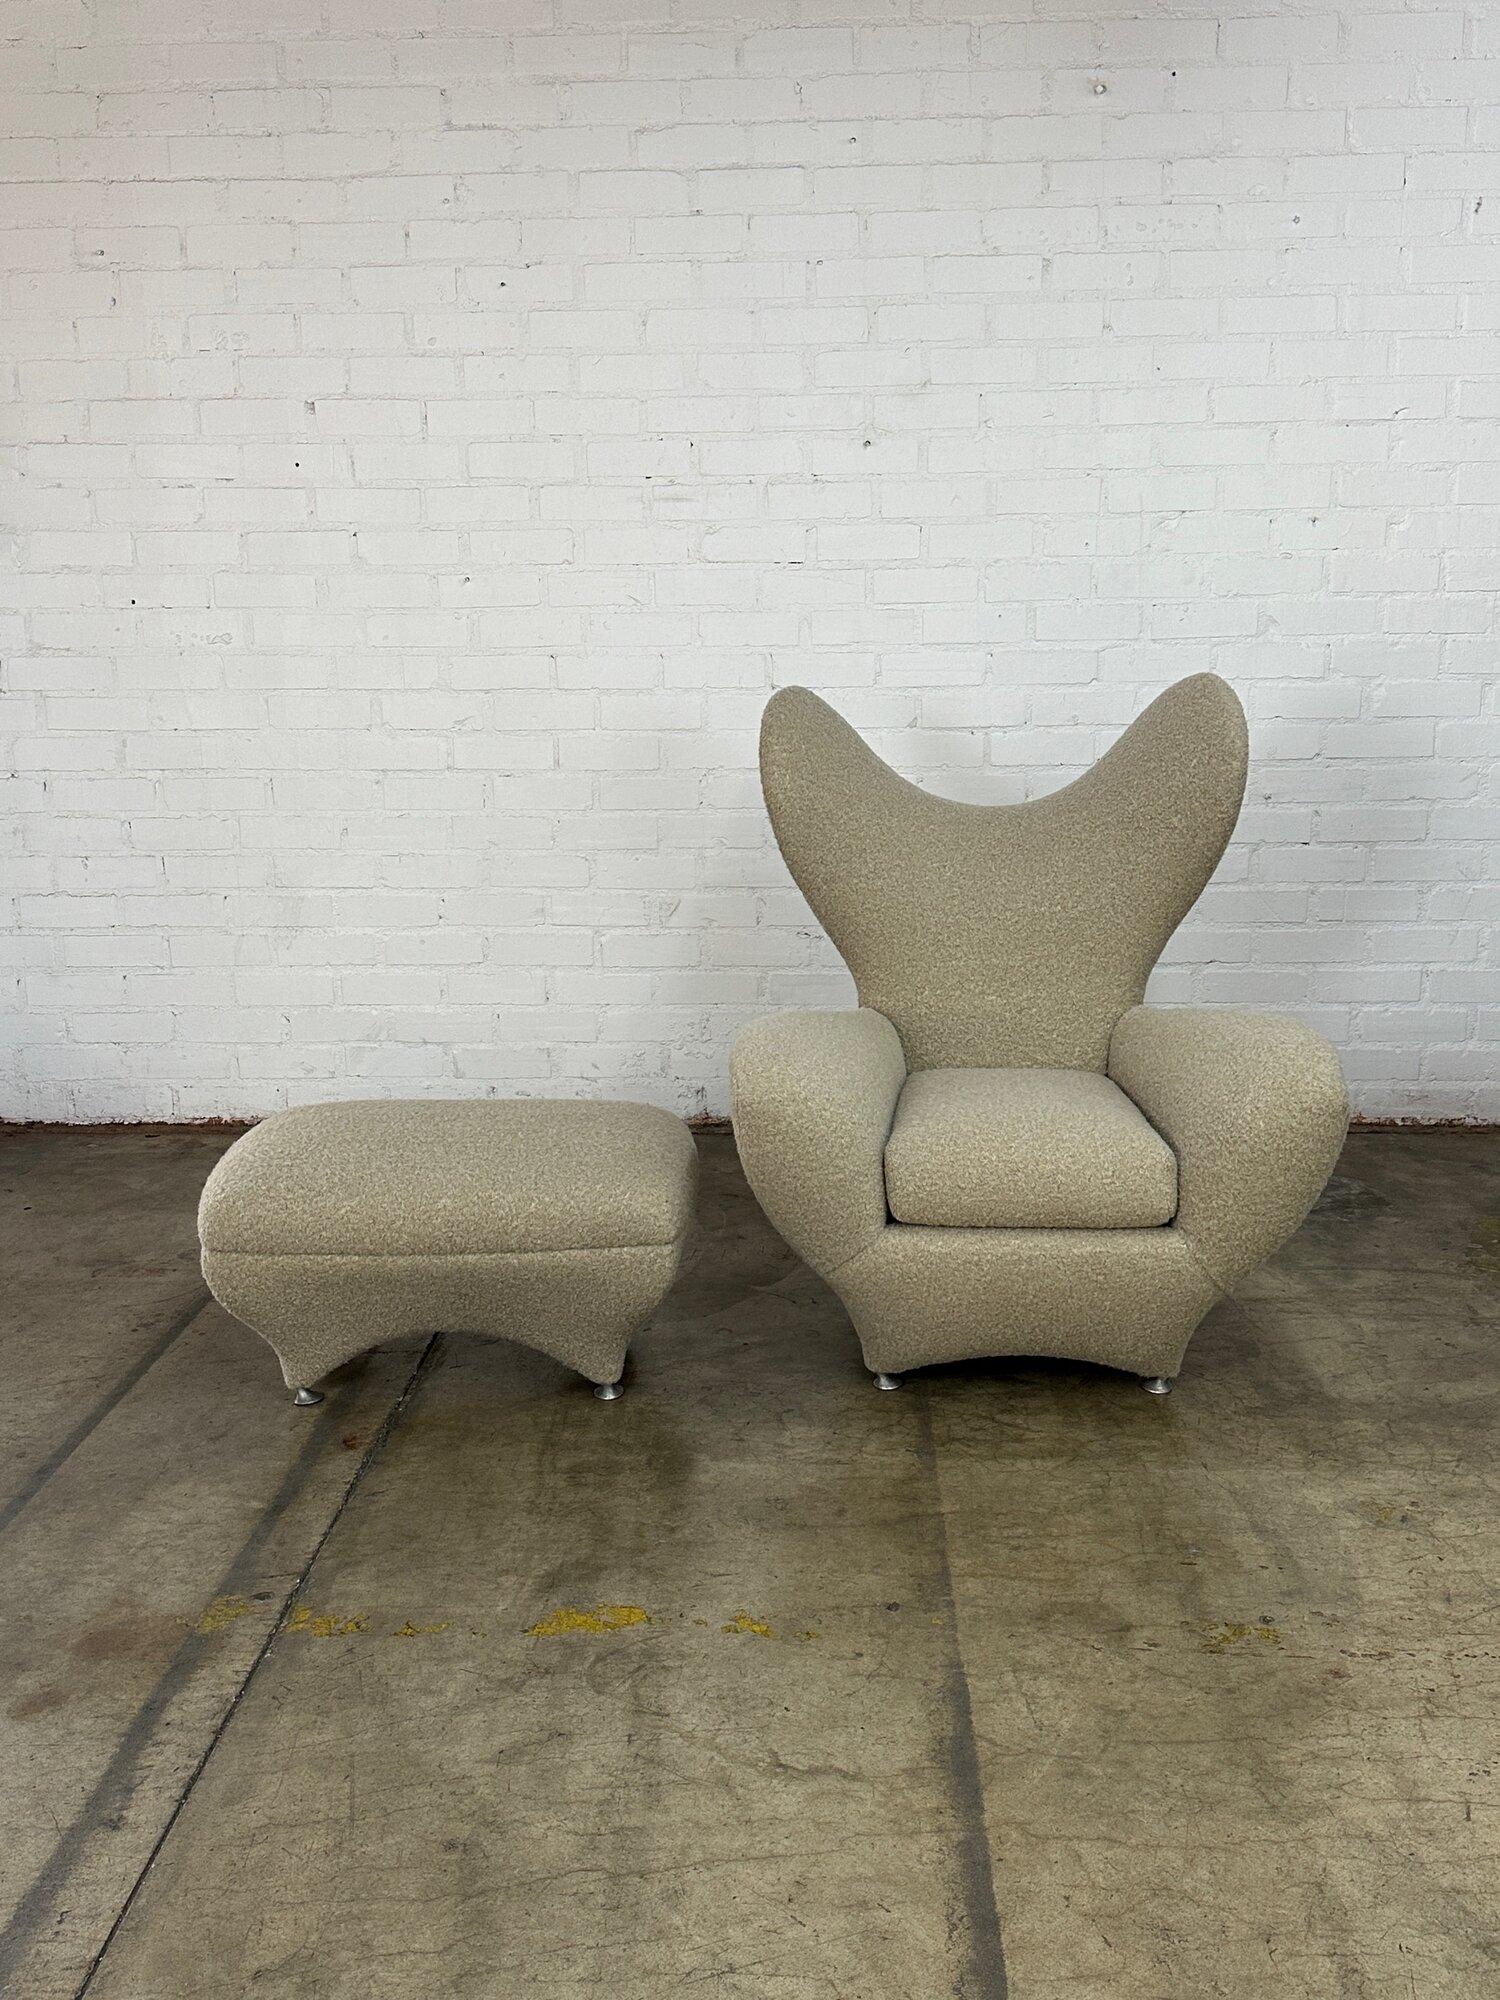 W39 D43 H47 SW20 SD26 SH19.5 AH24

Exceptional Sculptural Lounge Chair and Ottoman with very nice solid metal sculpted feet that are all adjustable. Lounge chair features a full restoration and fresh wool boucle fabric. Price is for the lounge chair